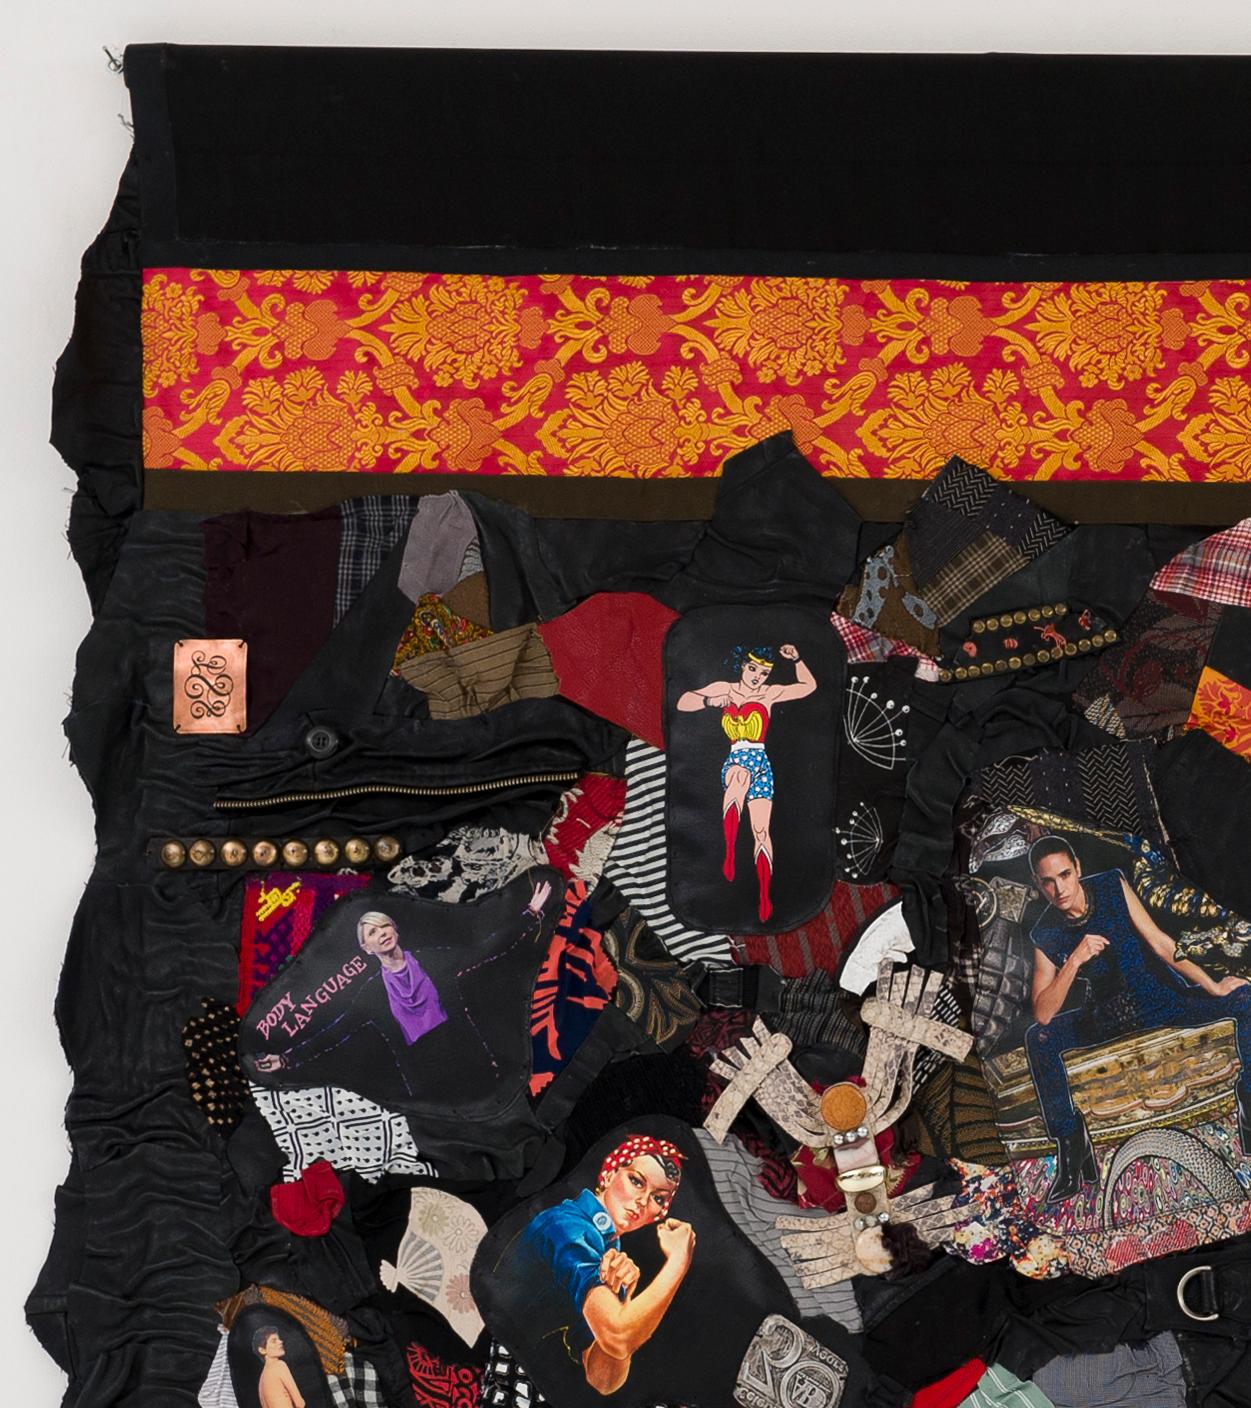 Linda Stein, Femininities: Body Language 897 - Feminist Contemporary Sculptural Tapestry 

Femininities: Body Language 897 is from Linda Stein's Sexism series, which advocates an expanded perspective of gender constructions--one that includes